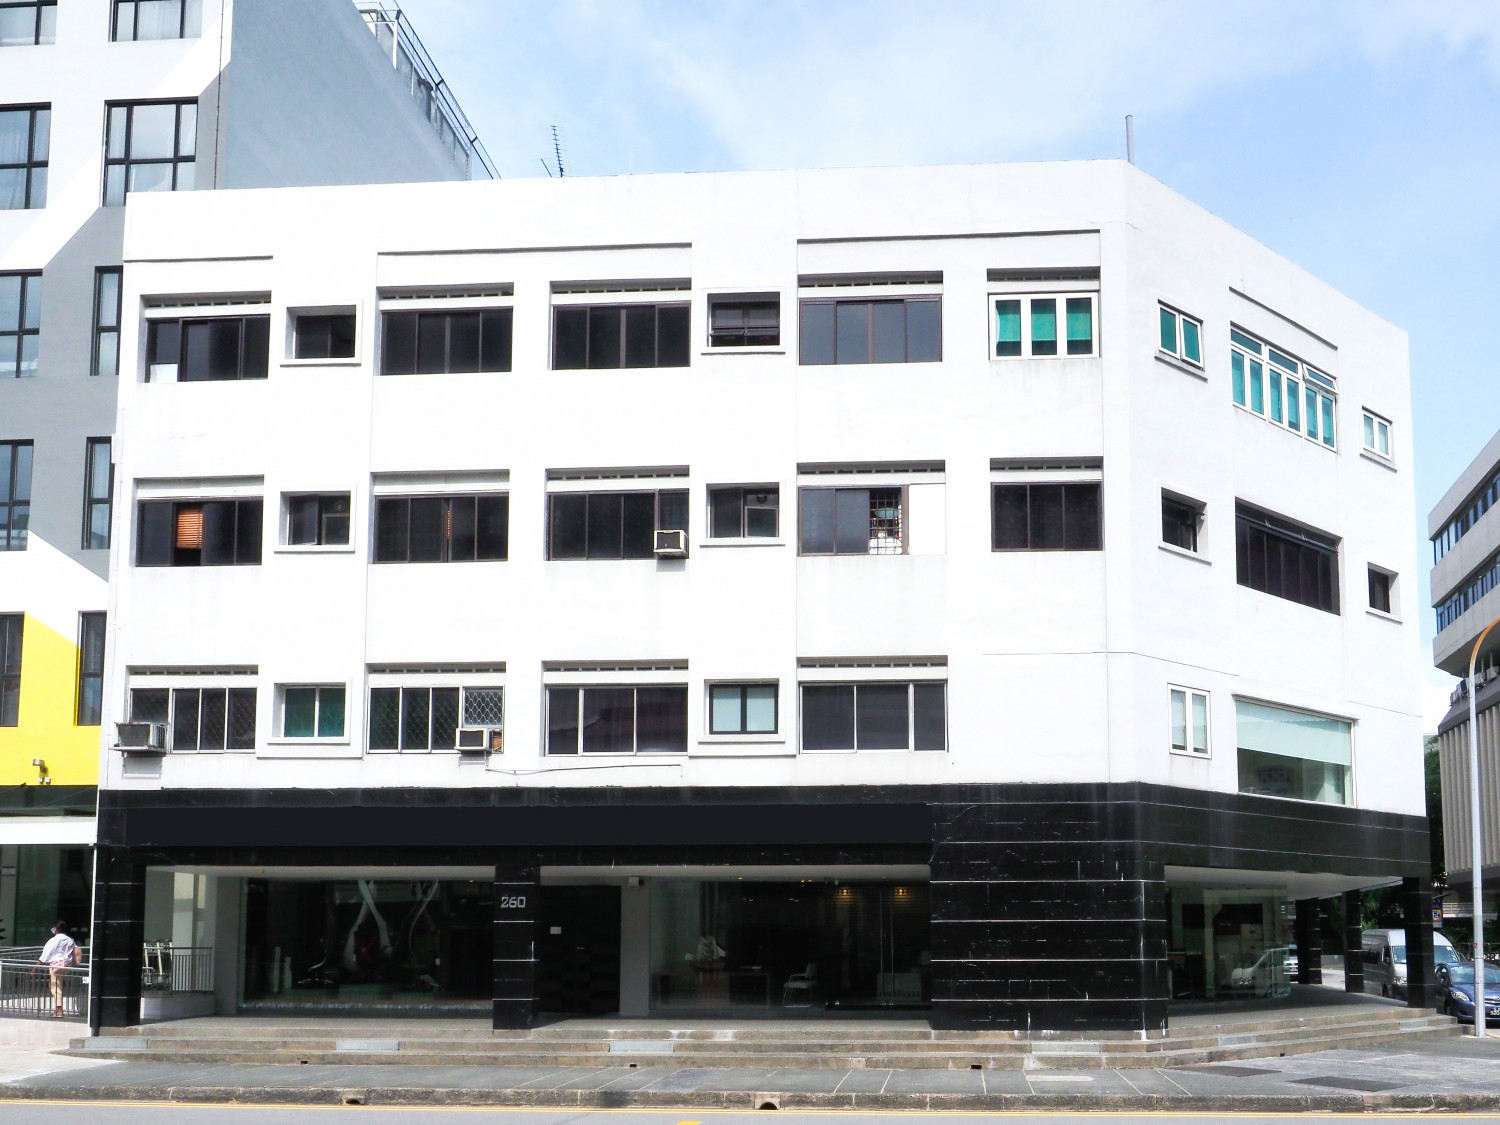 Strata commercial space in Jalan Besar for sale at $22 mil - Property News